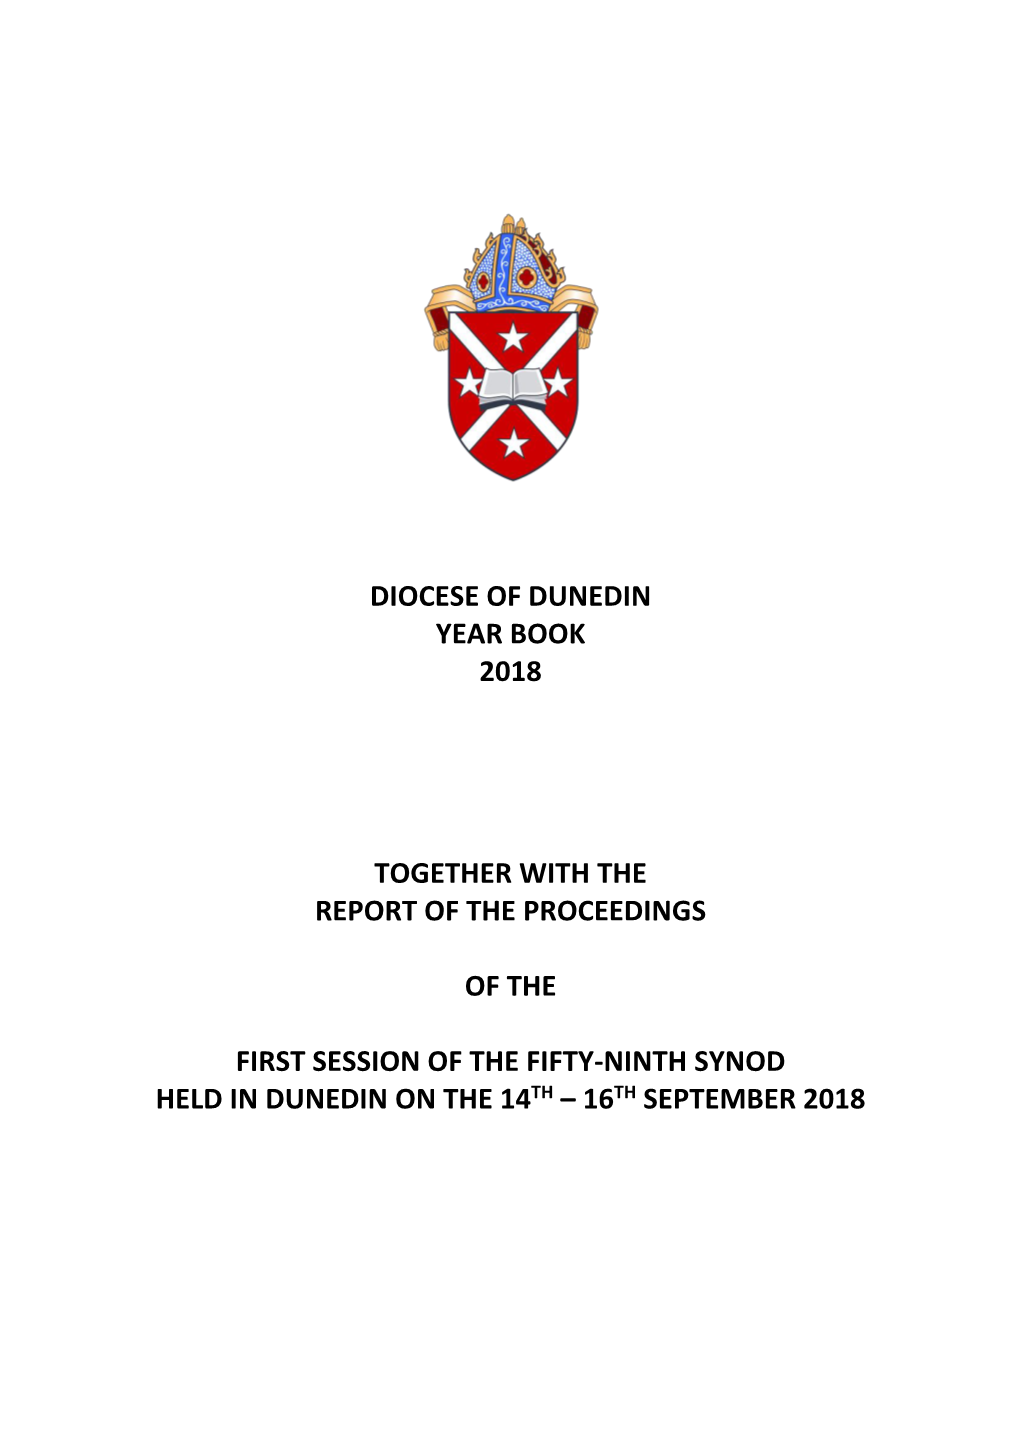 Diocese of Dunedin Year Book 2018